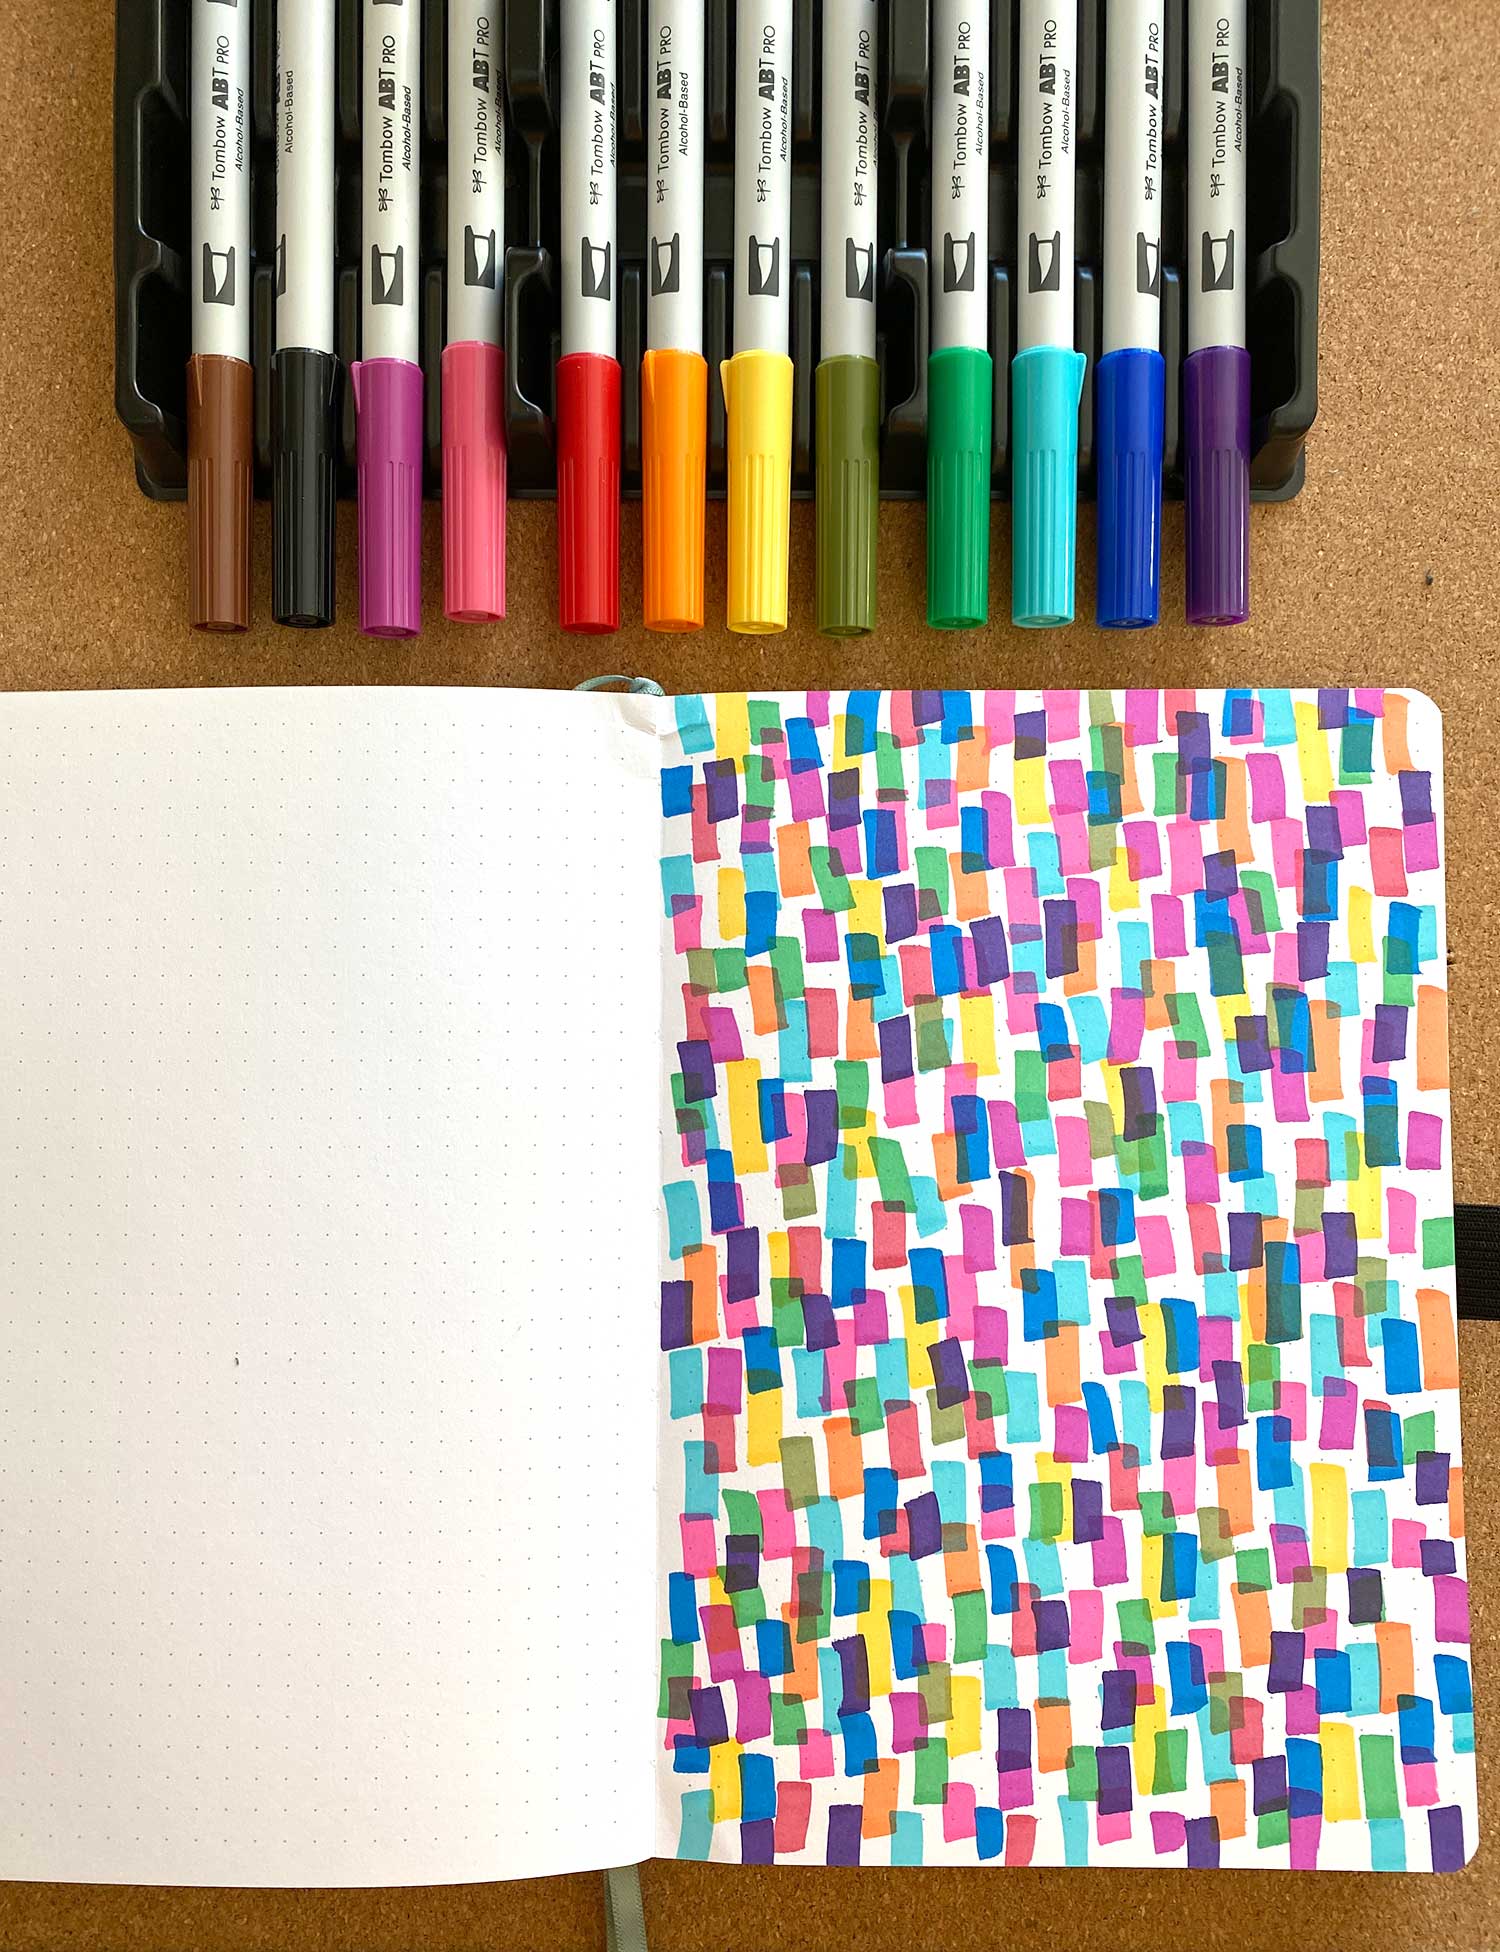 Use Alcohol Markers on Your Bullet Journal With These 10 Hacks